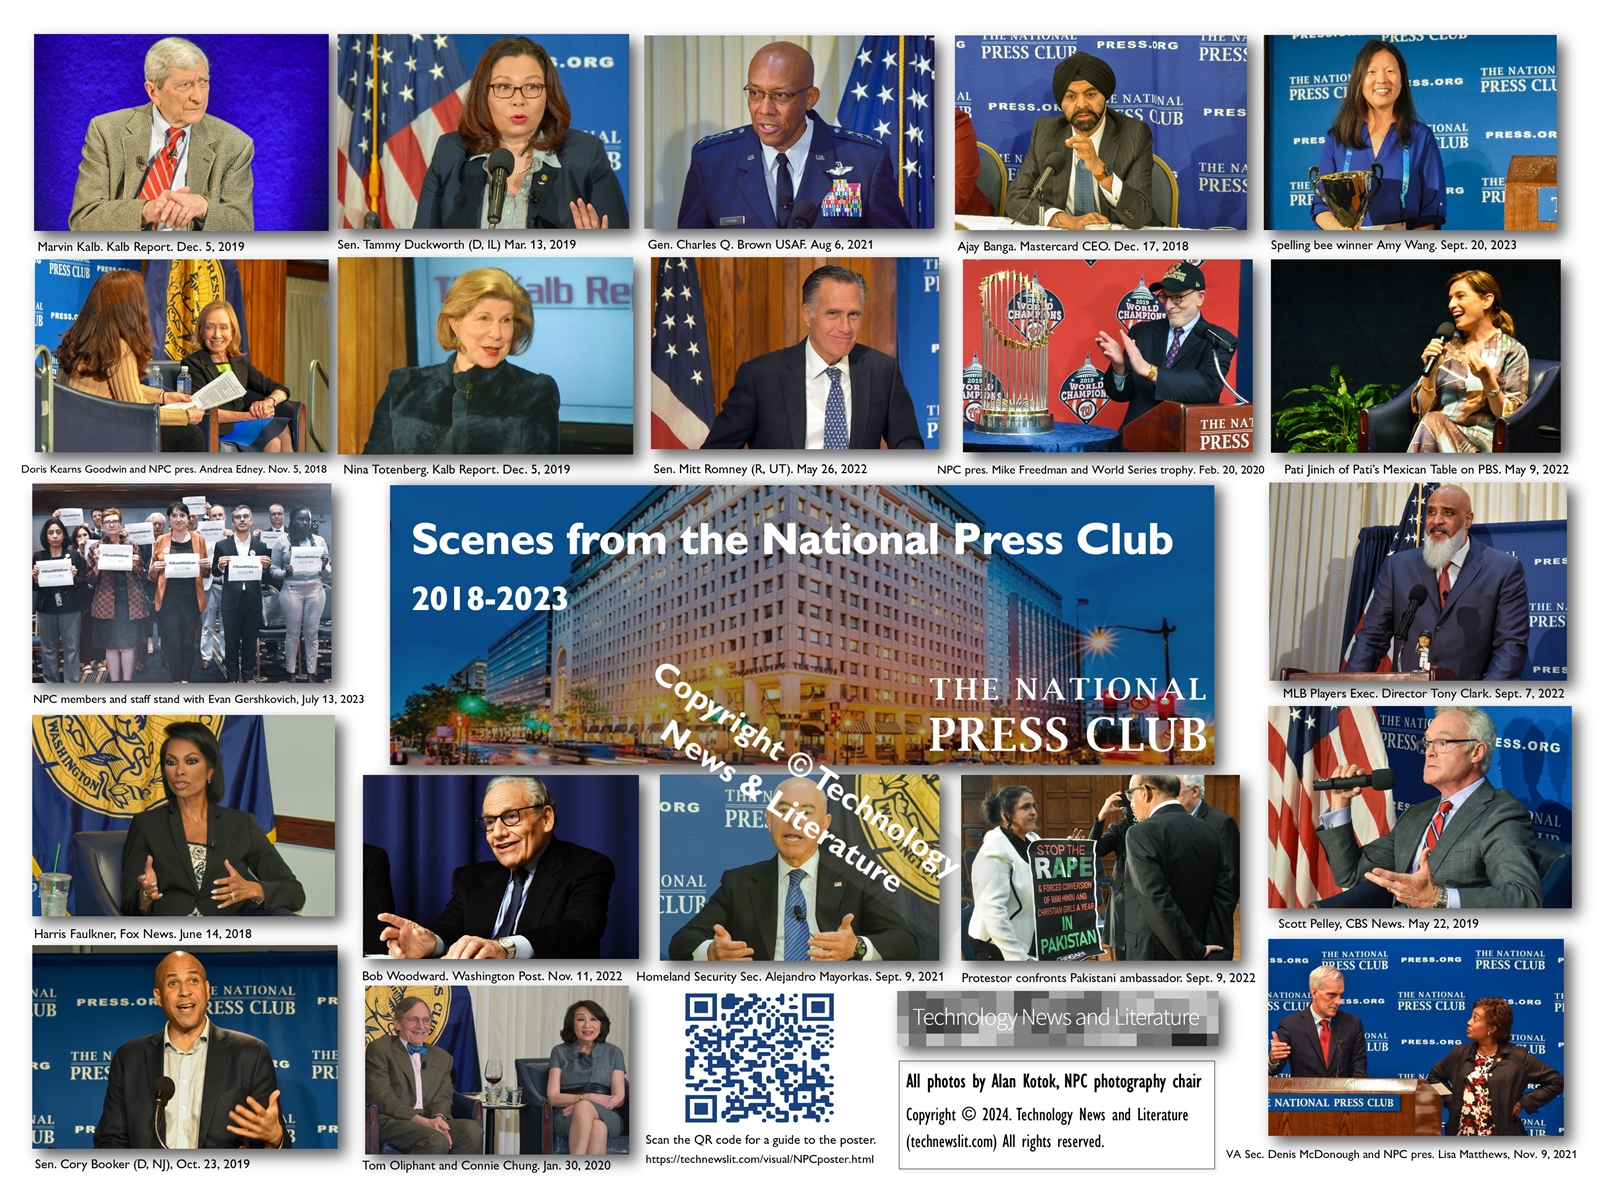 National Press Club poster image with watermark